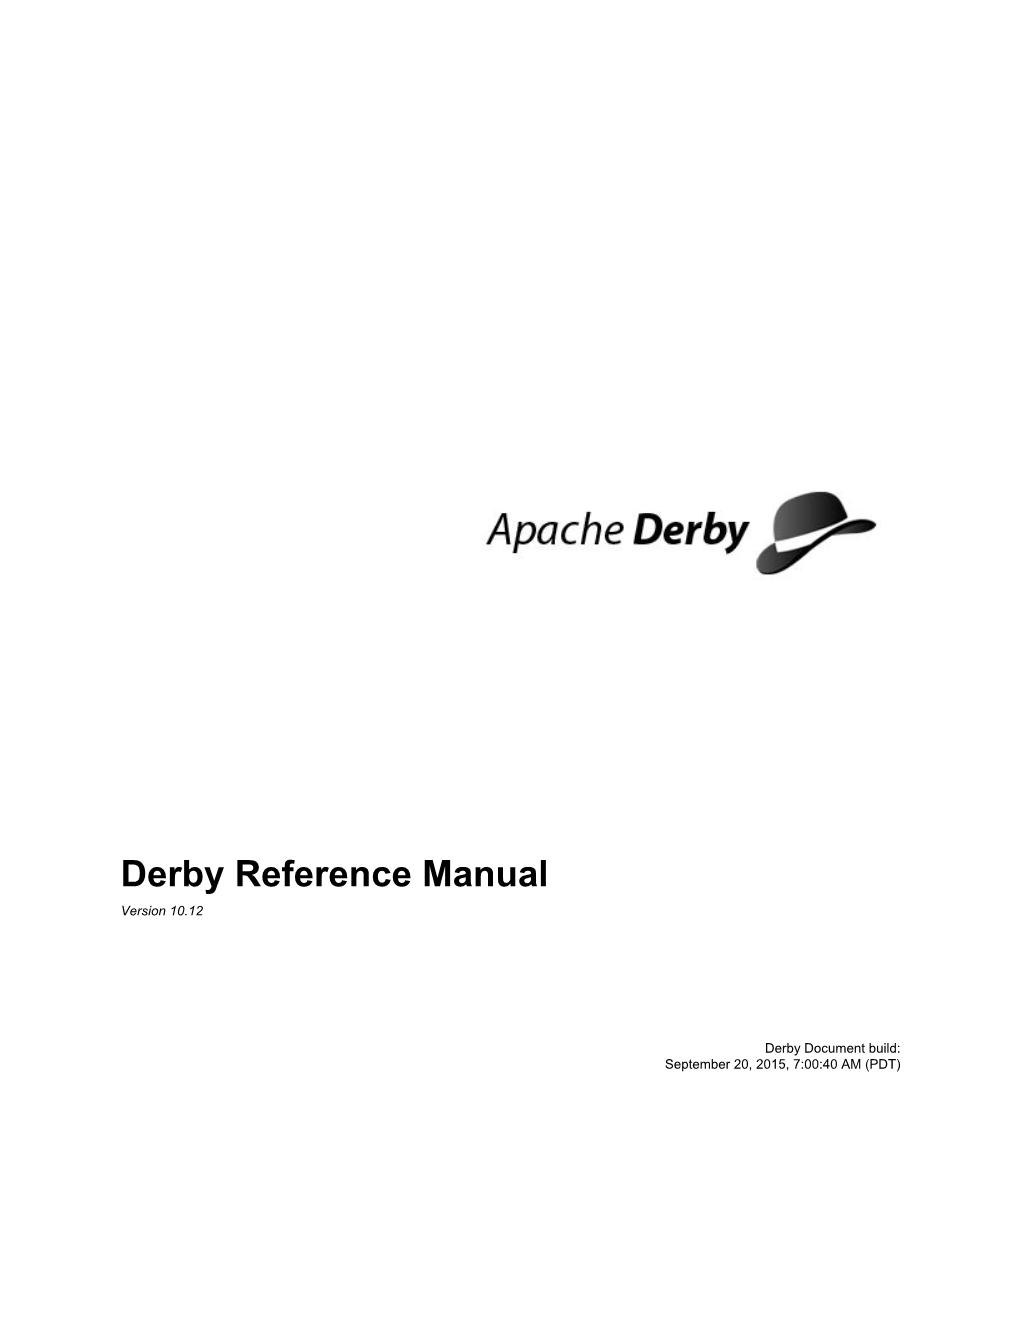 Derby Reference Manual Version 10.12